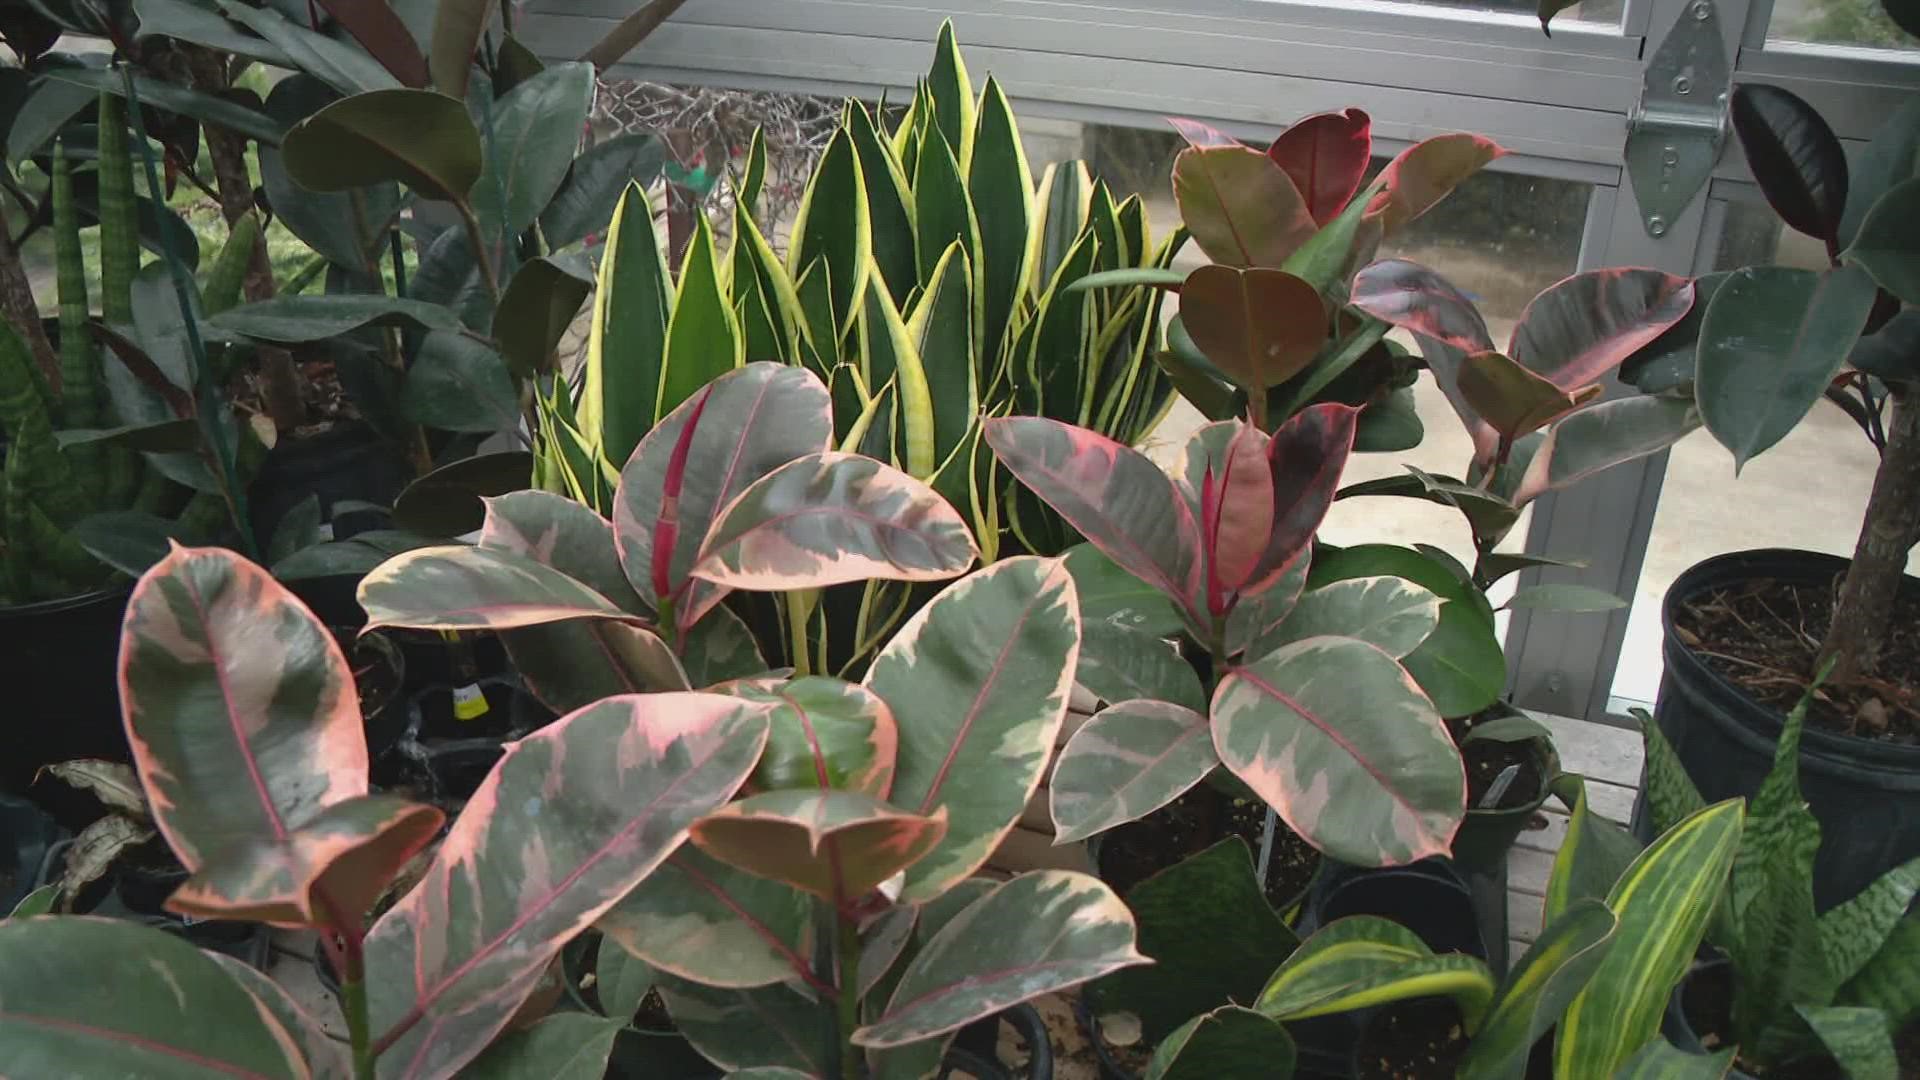 While spending more time indoors during the winter, you may want to focus some of that time tending to your house plants.